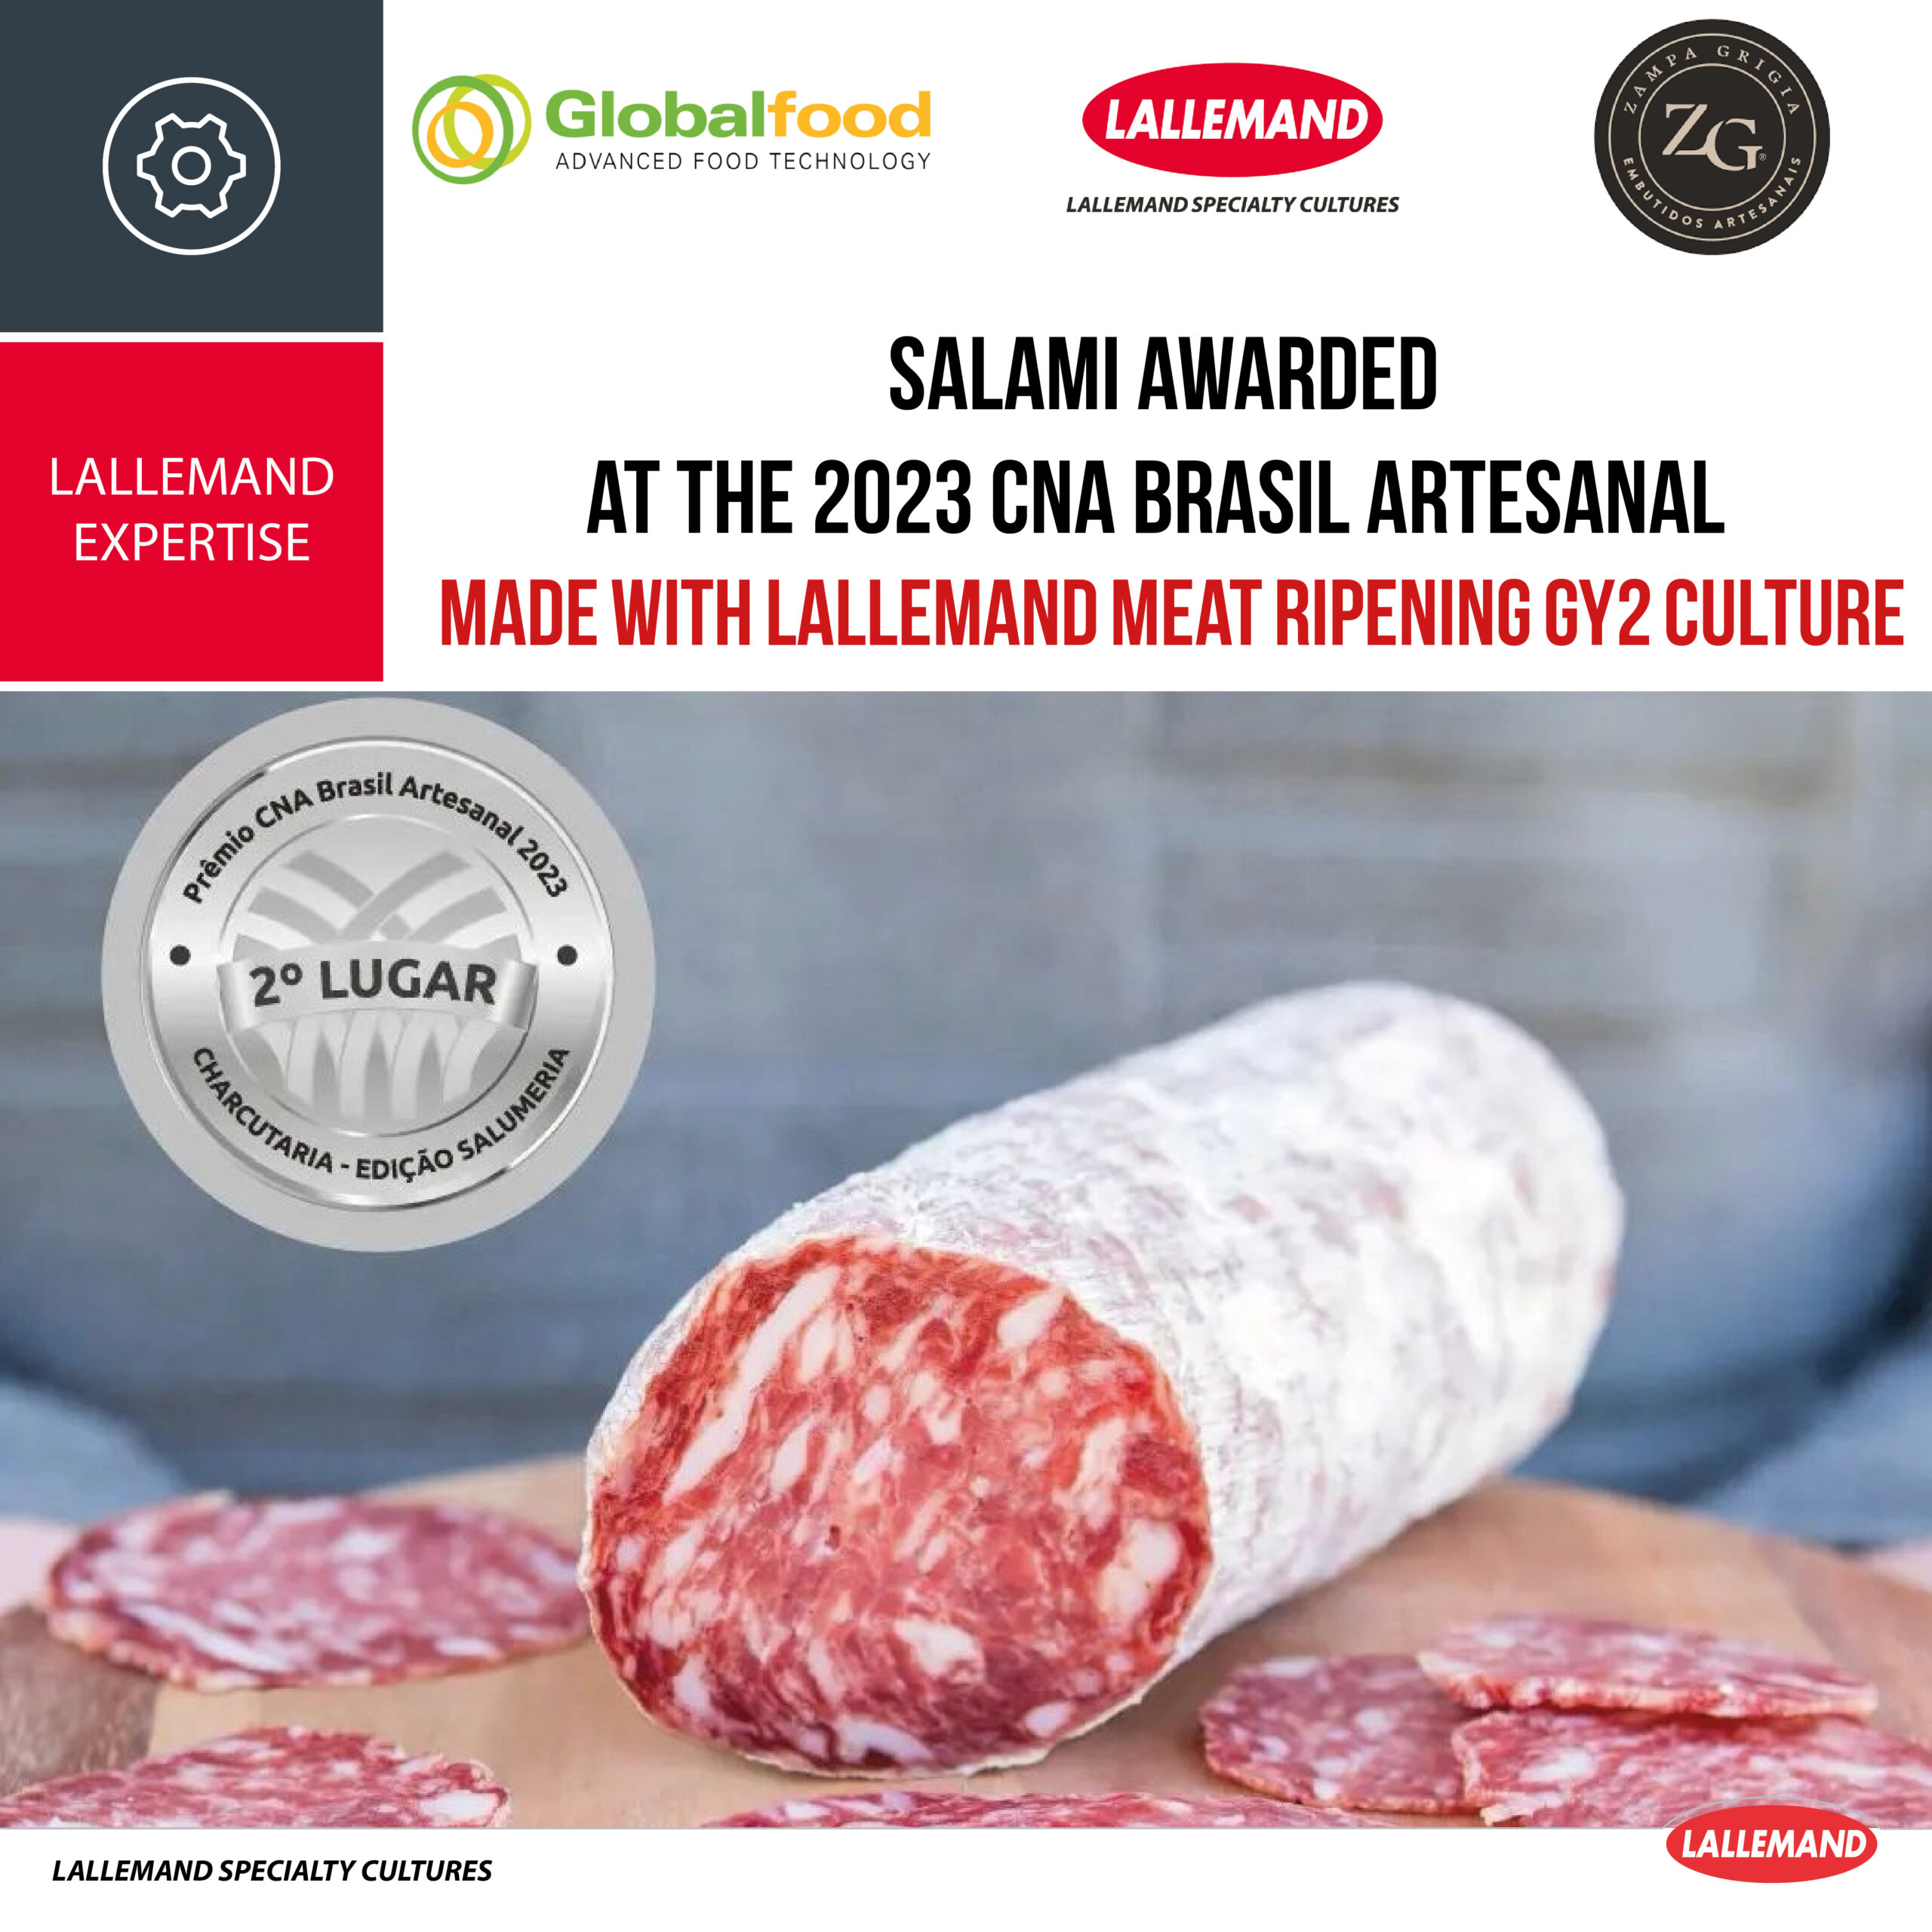 Our meat ripening GY2 culture awarded